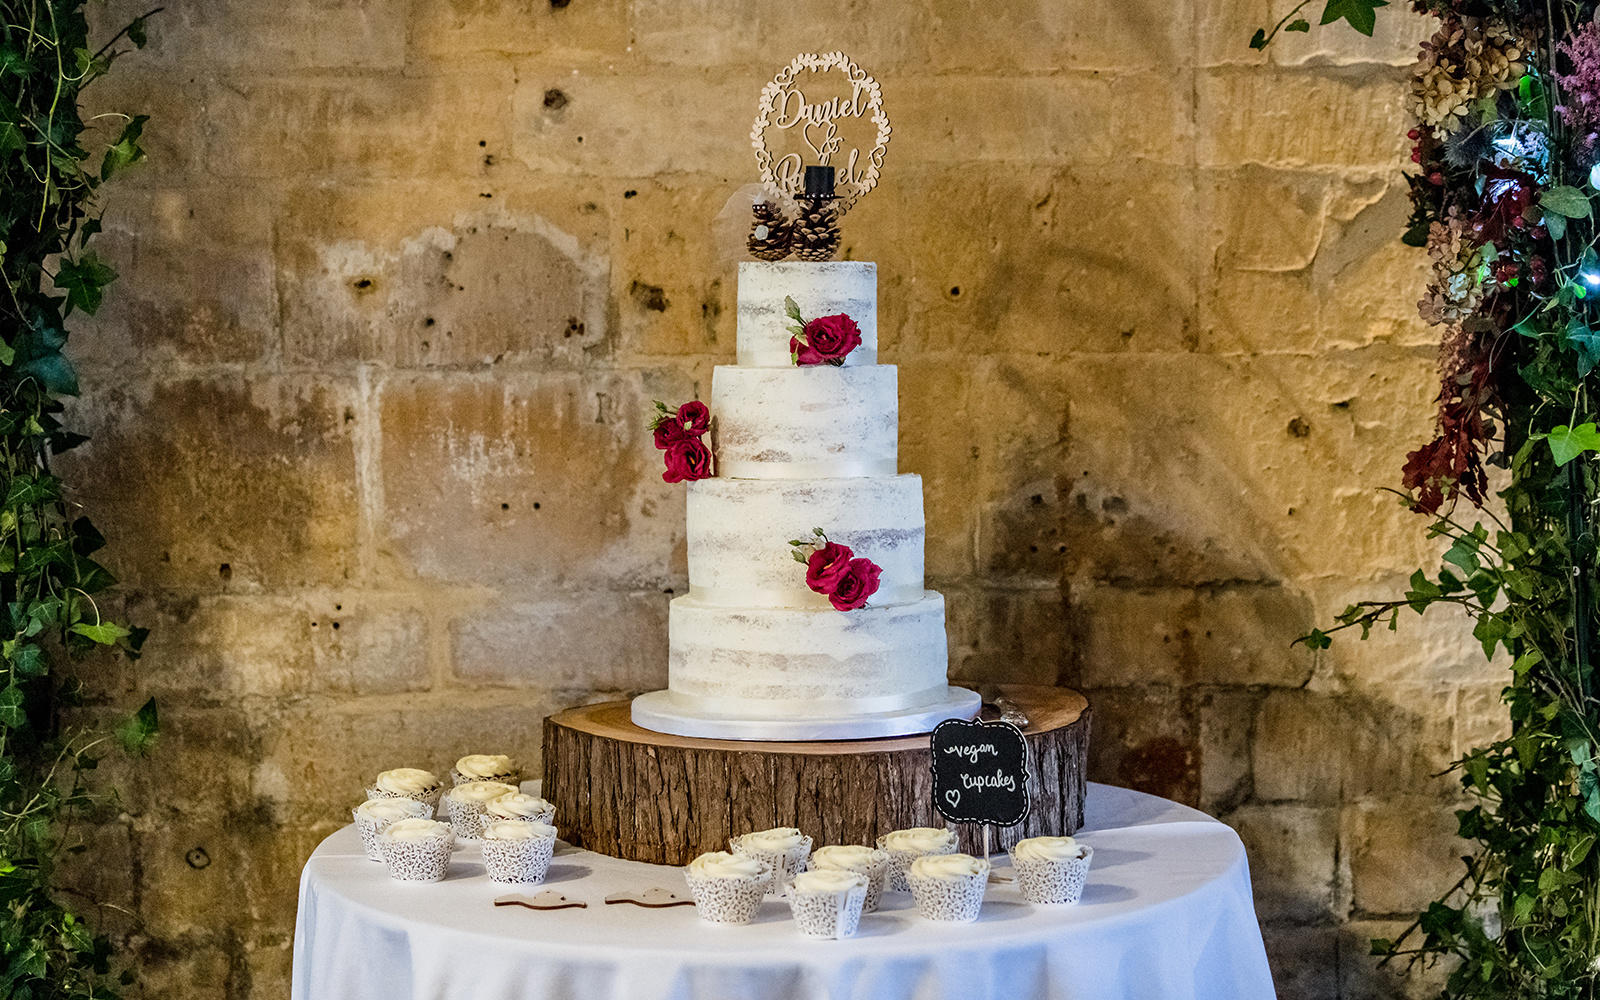 Capture Every Moment wedding photography duo from Cirencester reportage traditional photographers Lapstone Barn Chipping Campden Cotswolds venue Wedding Cake 4 tiers